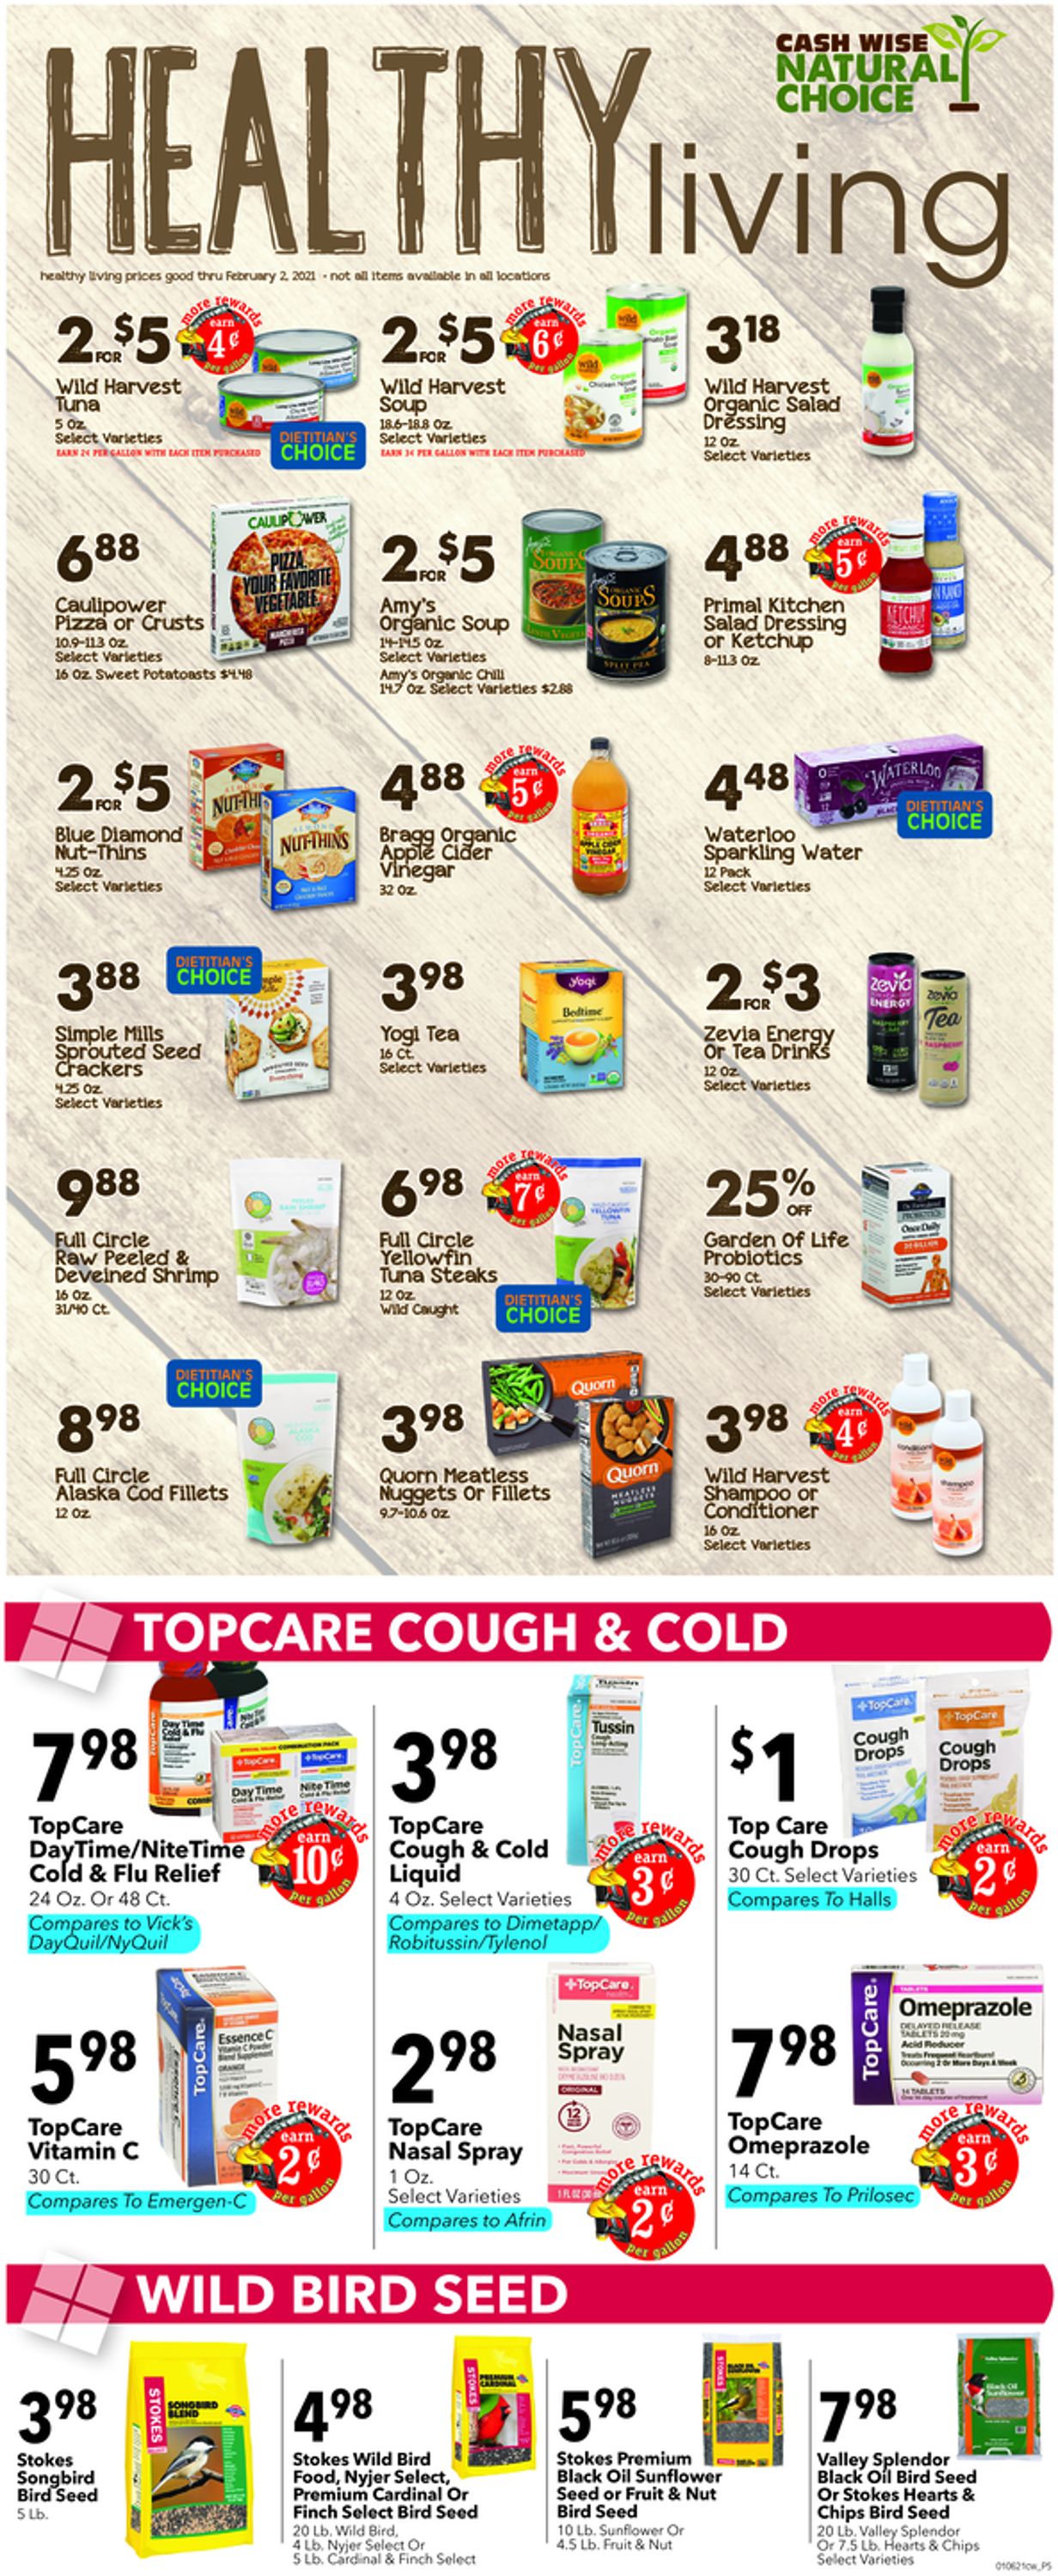 Cash Wise Weekly Ad Circular - valid 01/06-01/12/2021 (Page 4)